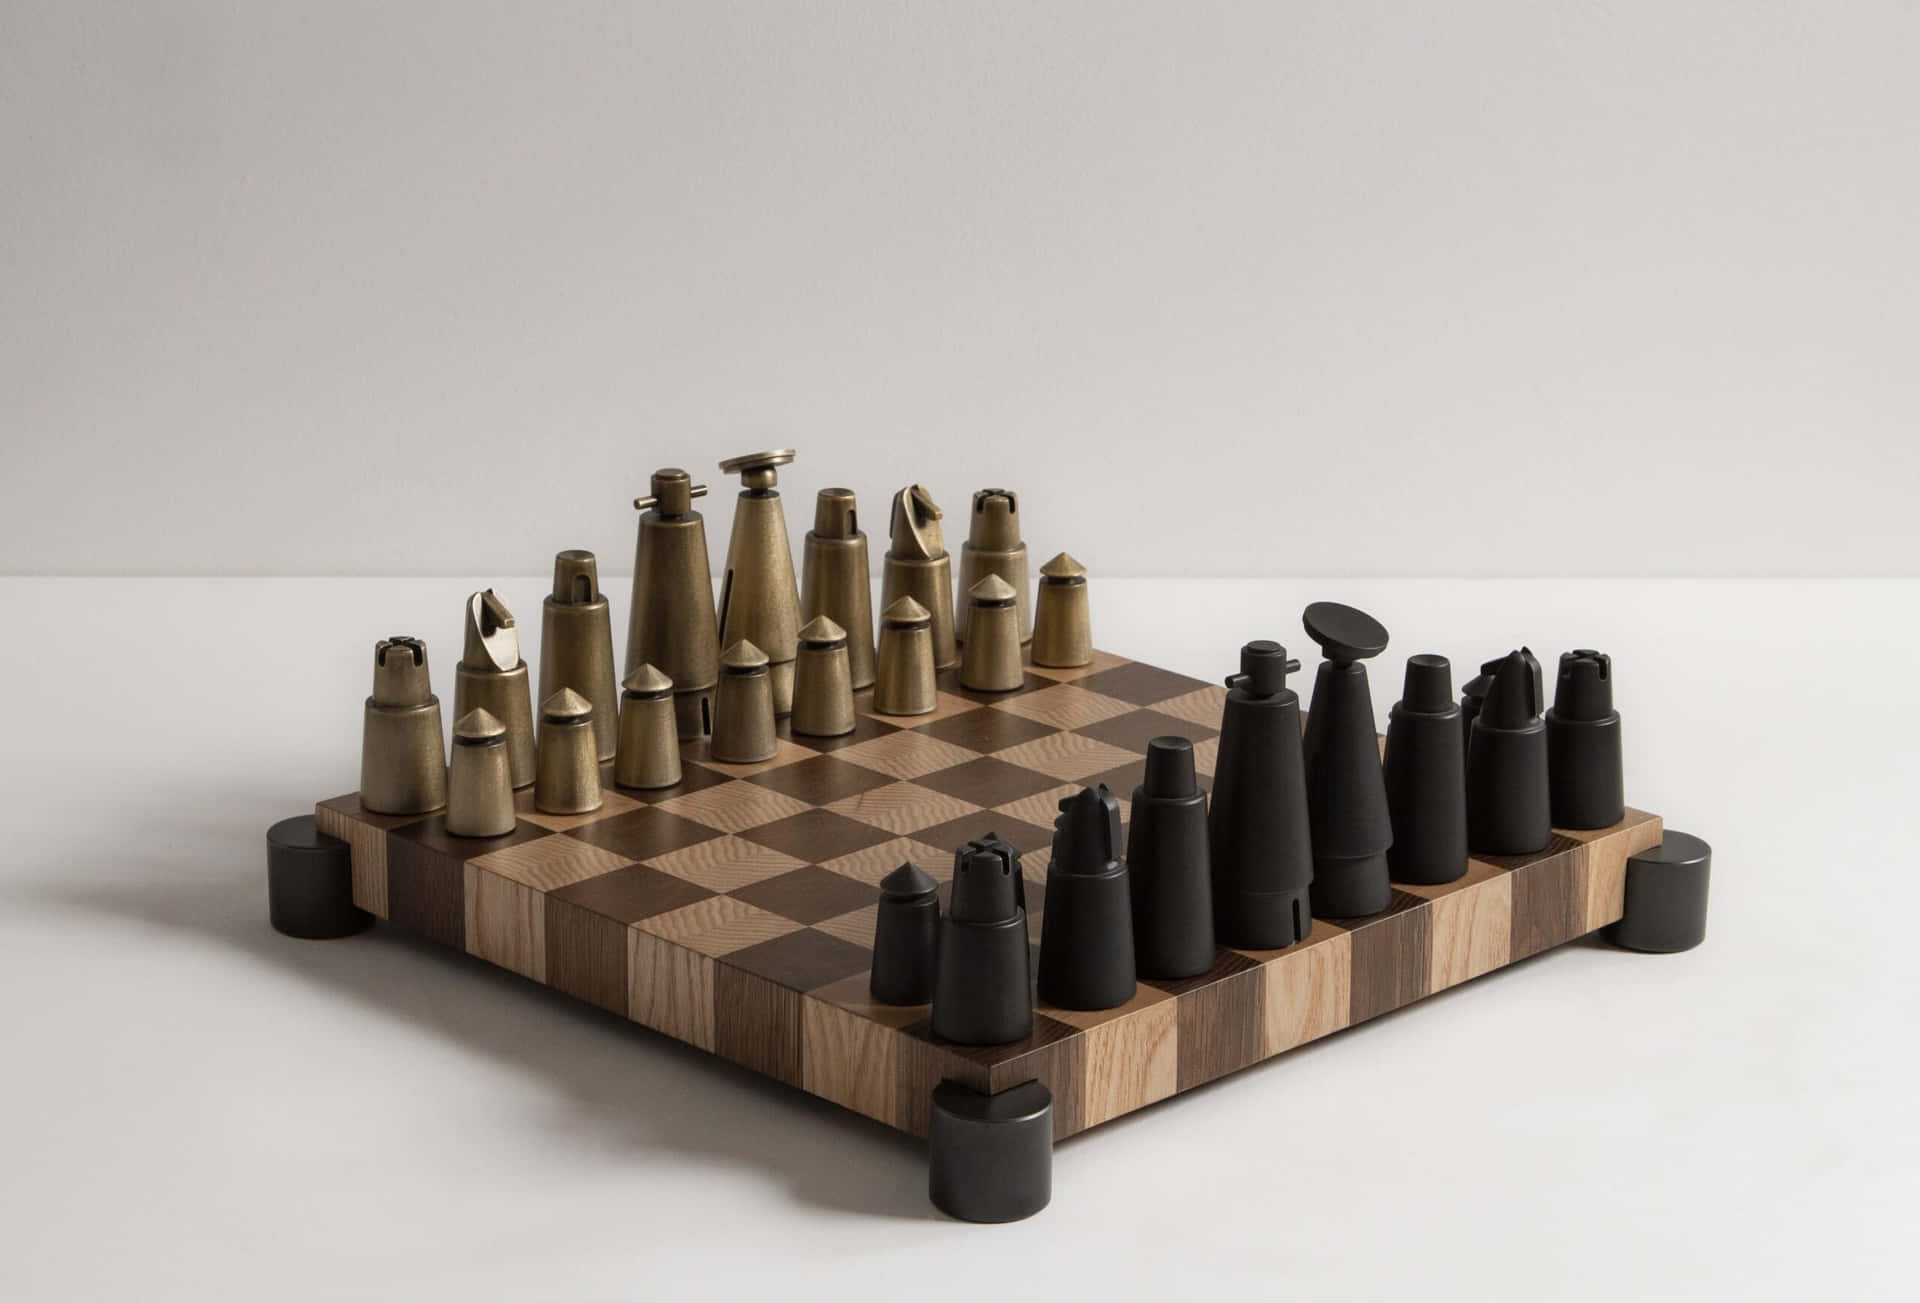 Play The Game Of Chess On A Checkerboard